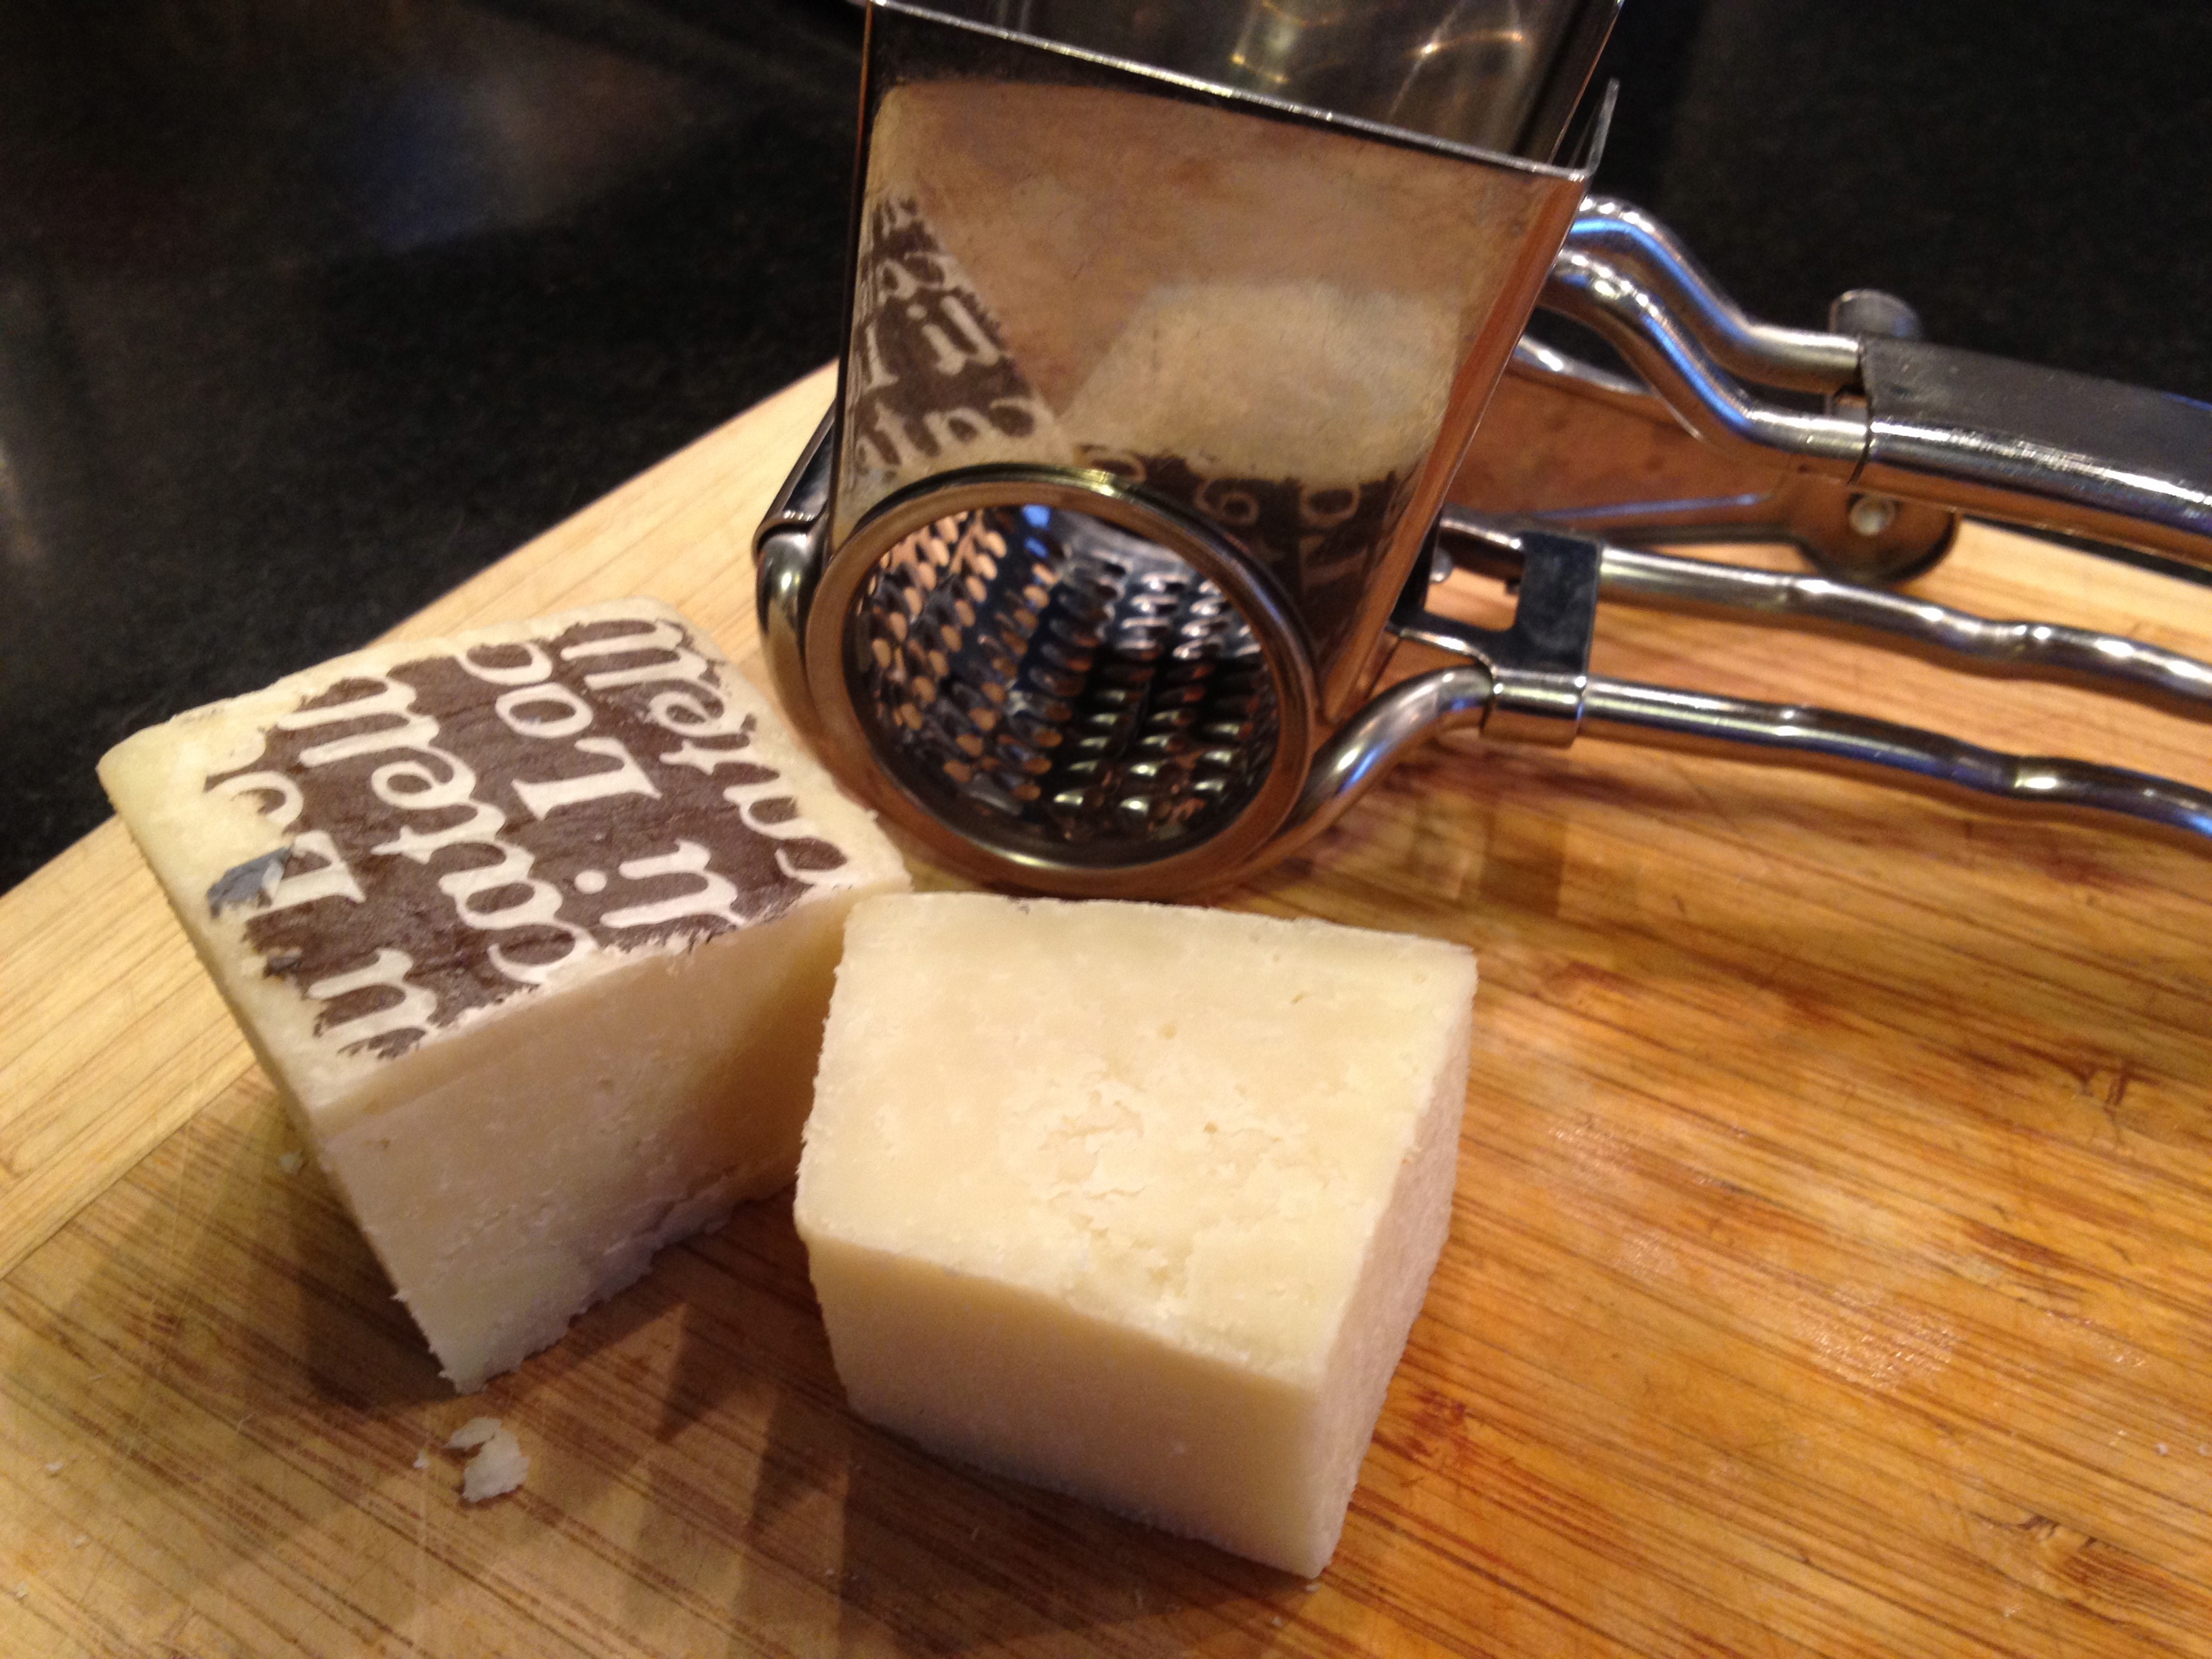 Romano cheese on a wooden cutting board.